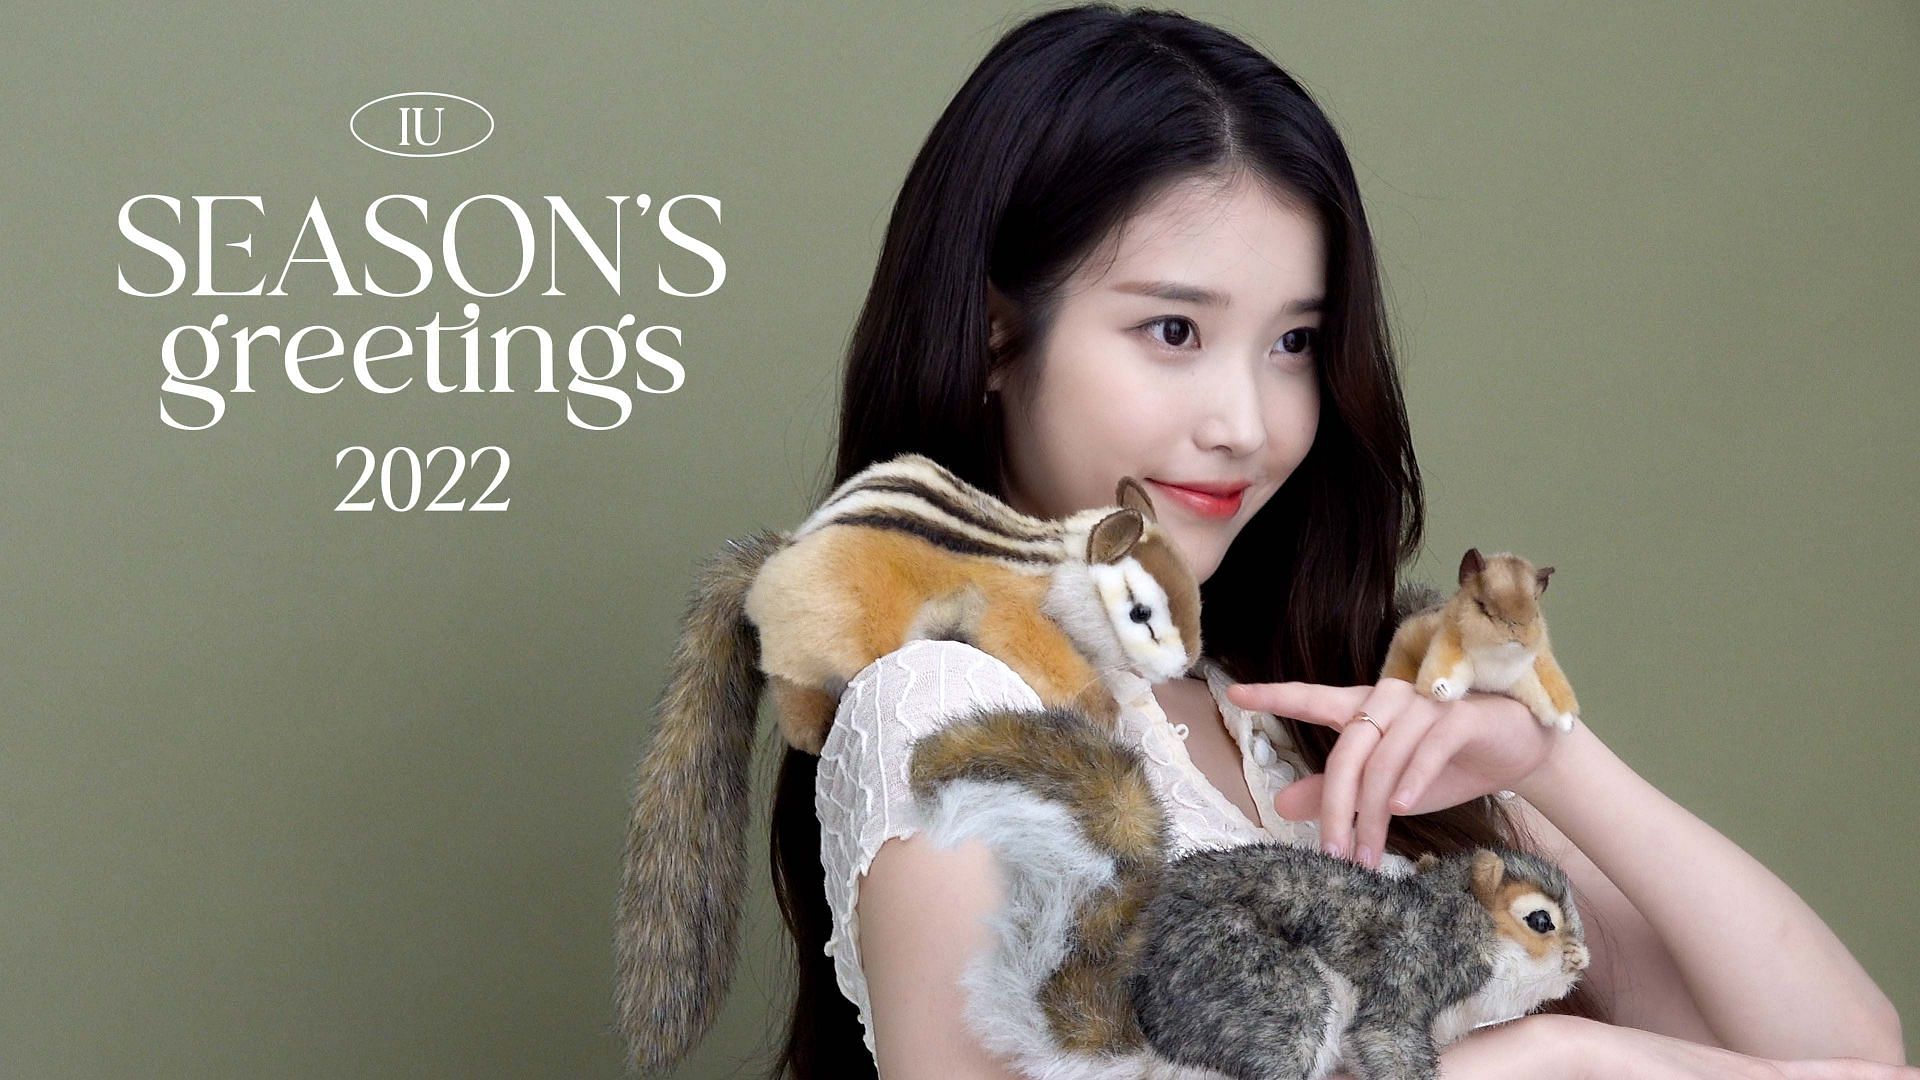 Iu 2022 Schedule Iu's Agency Apologizes For Season's Greetings And Other Merch Errors